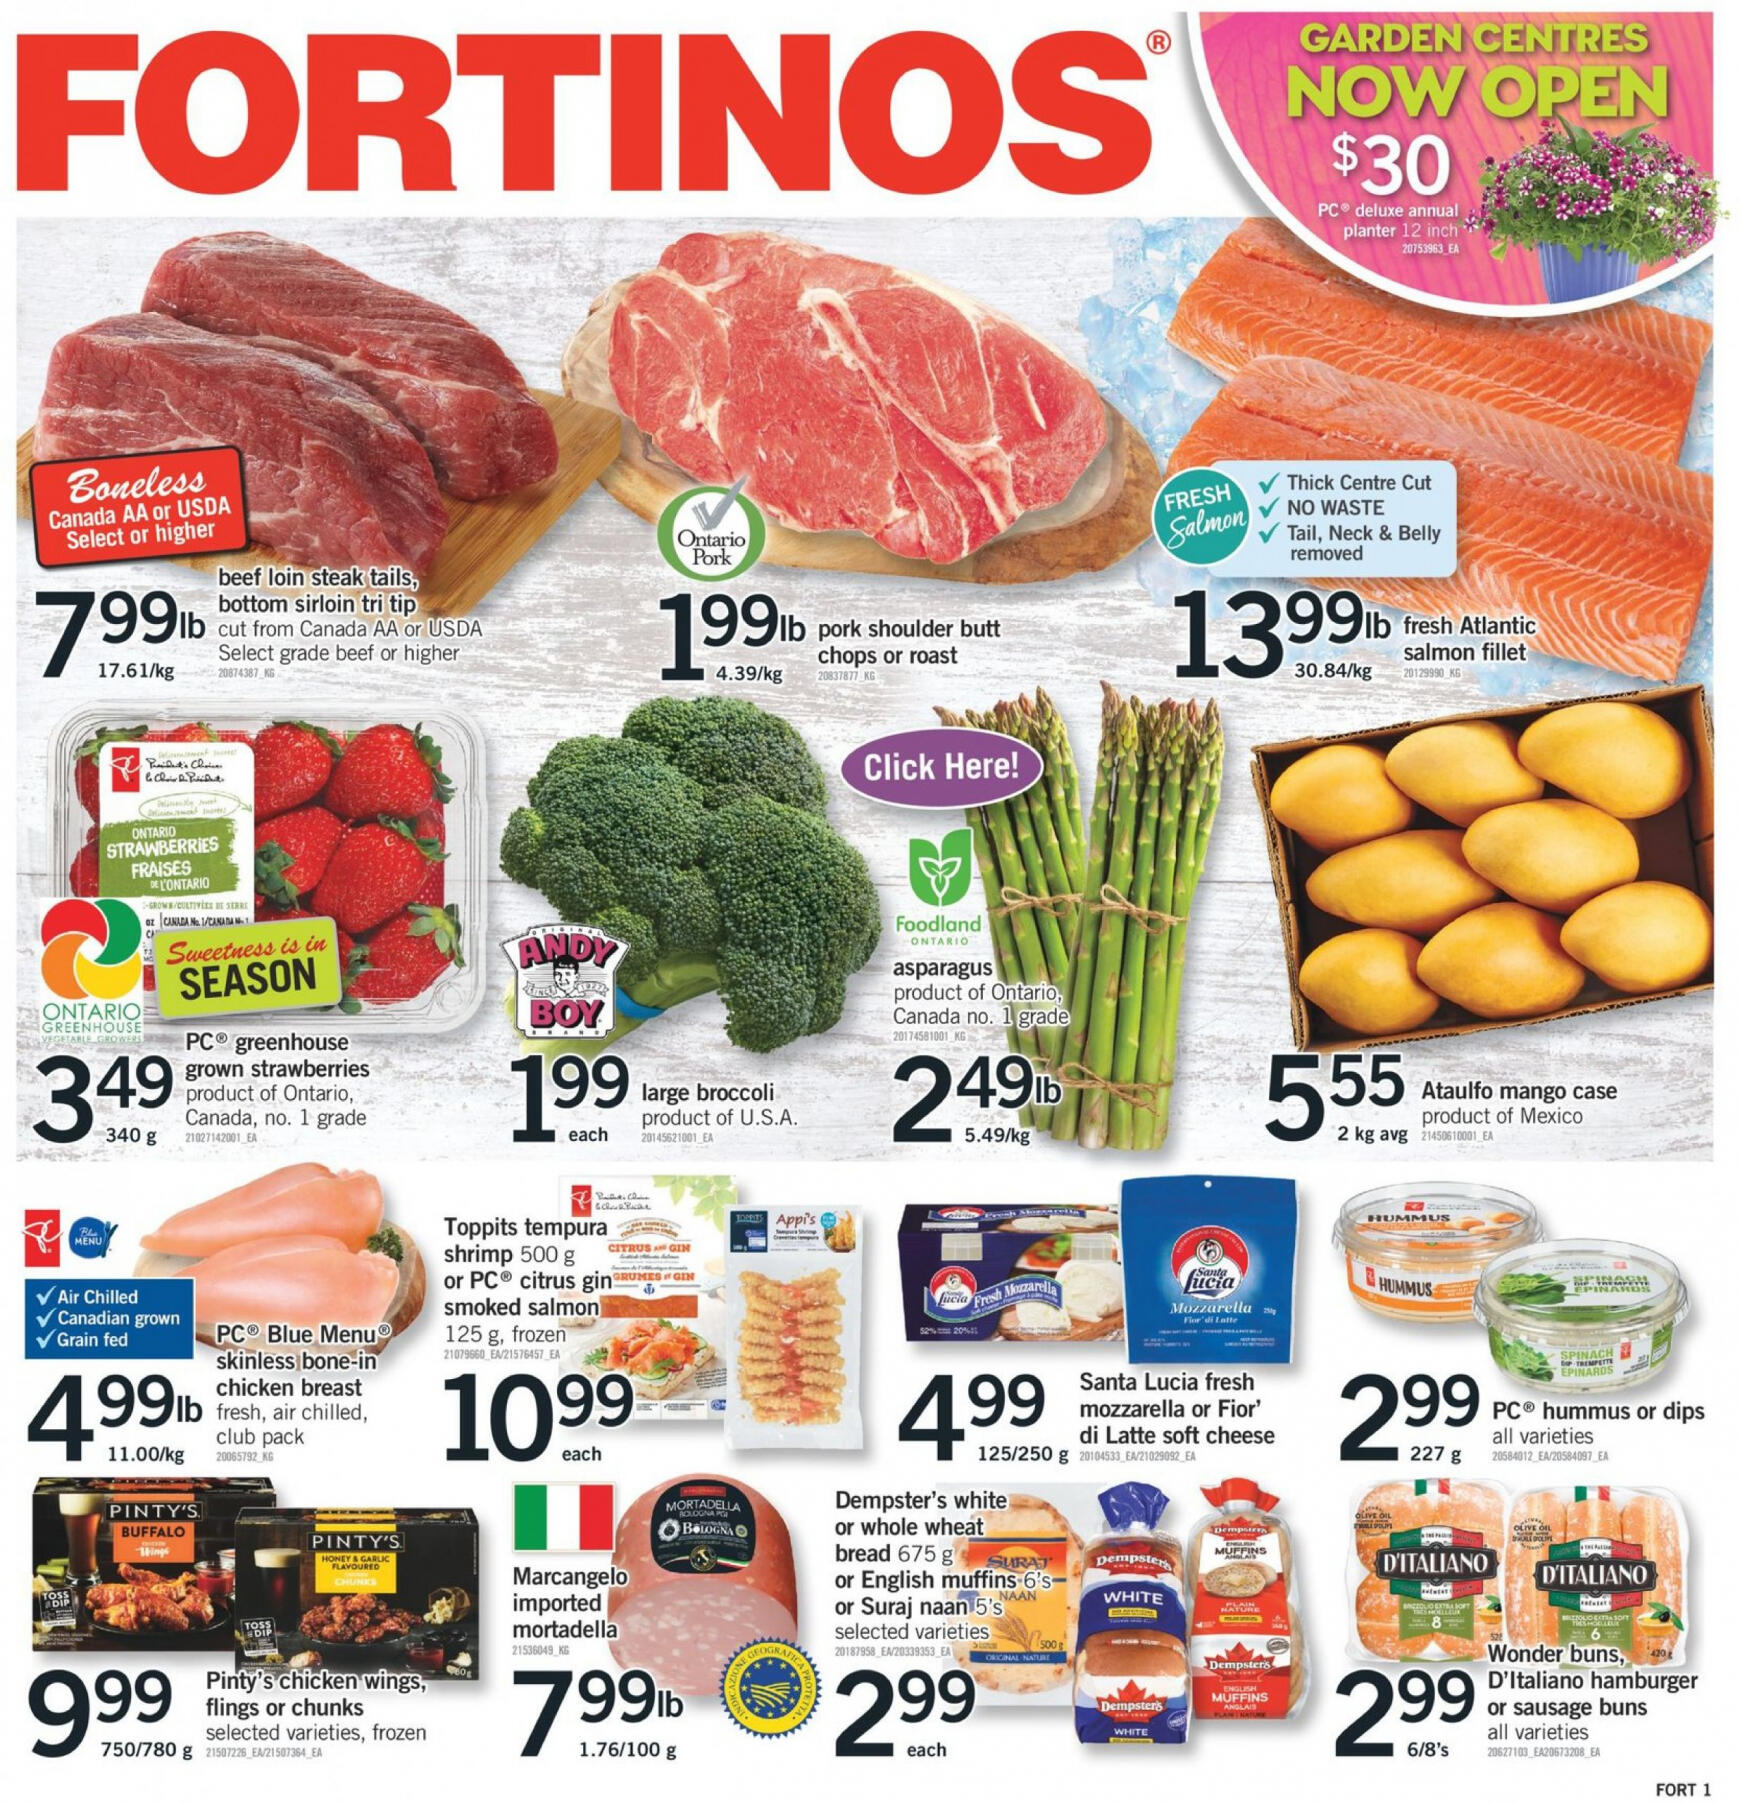 fortinos - Fortinos flyer current 23.05. - 29.05.